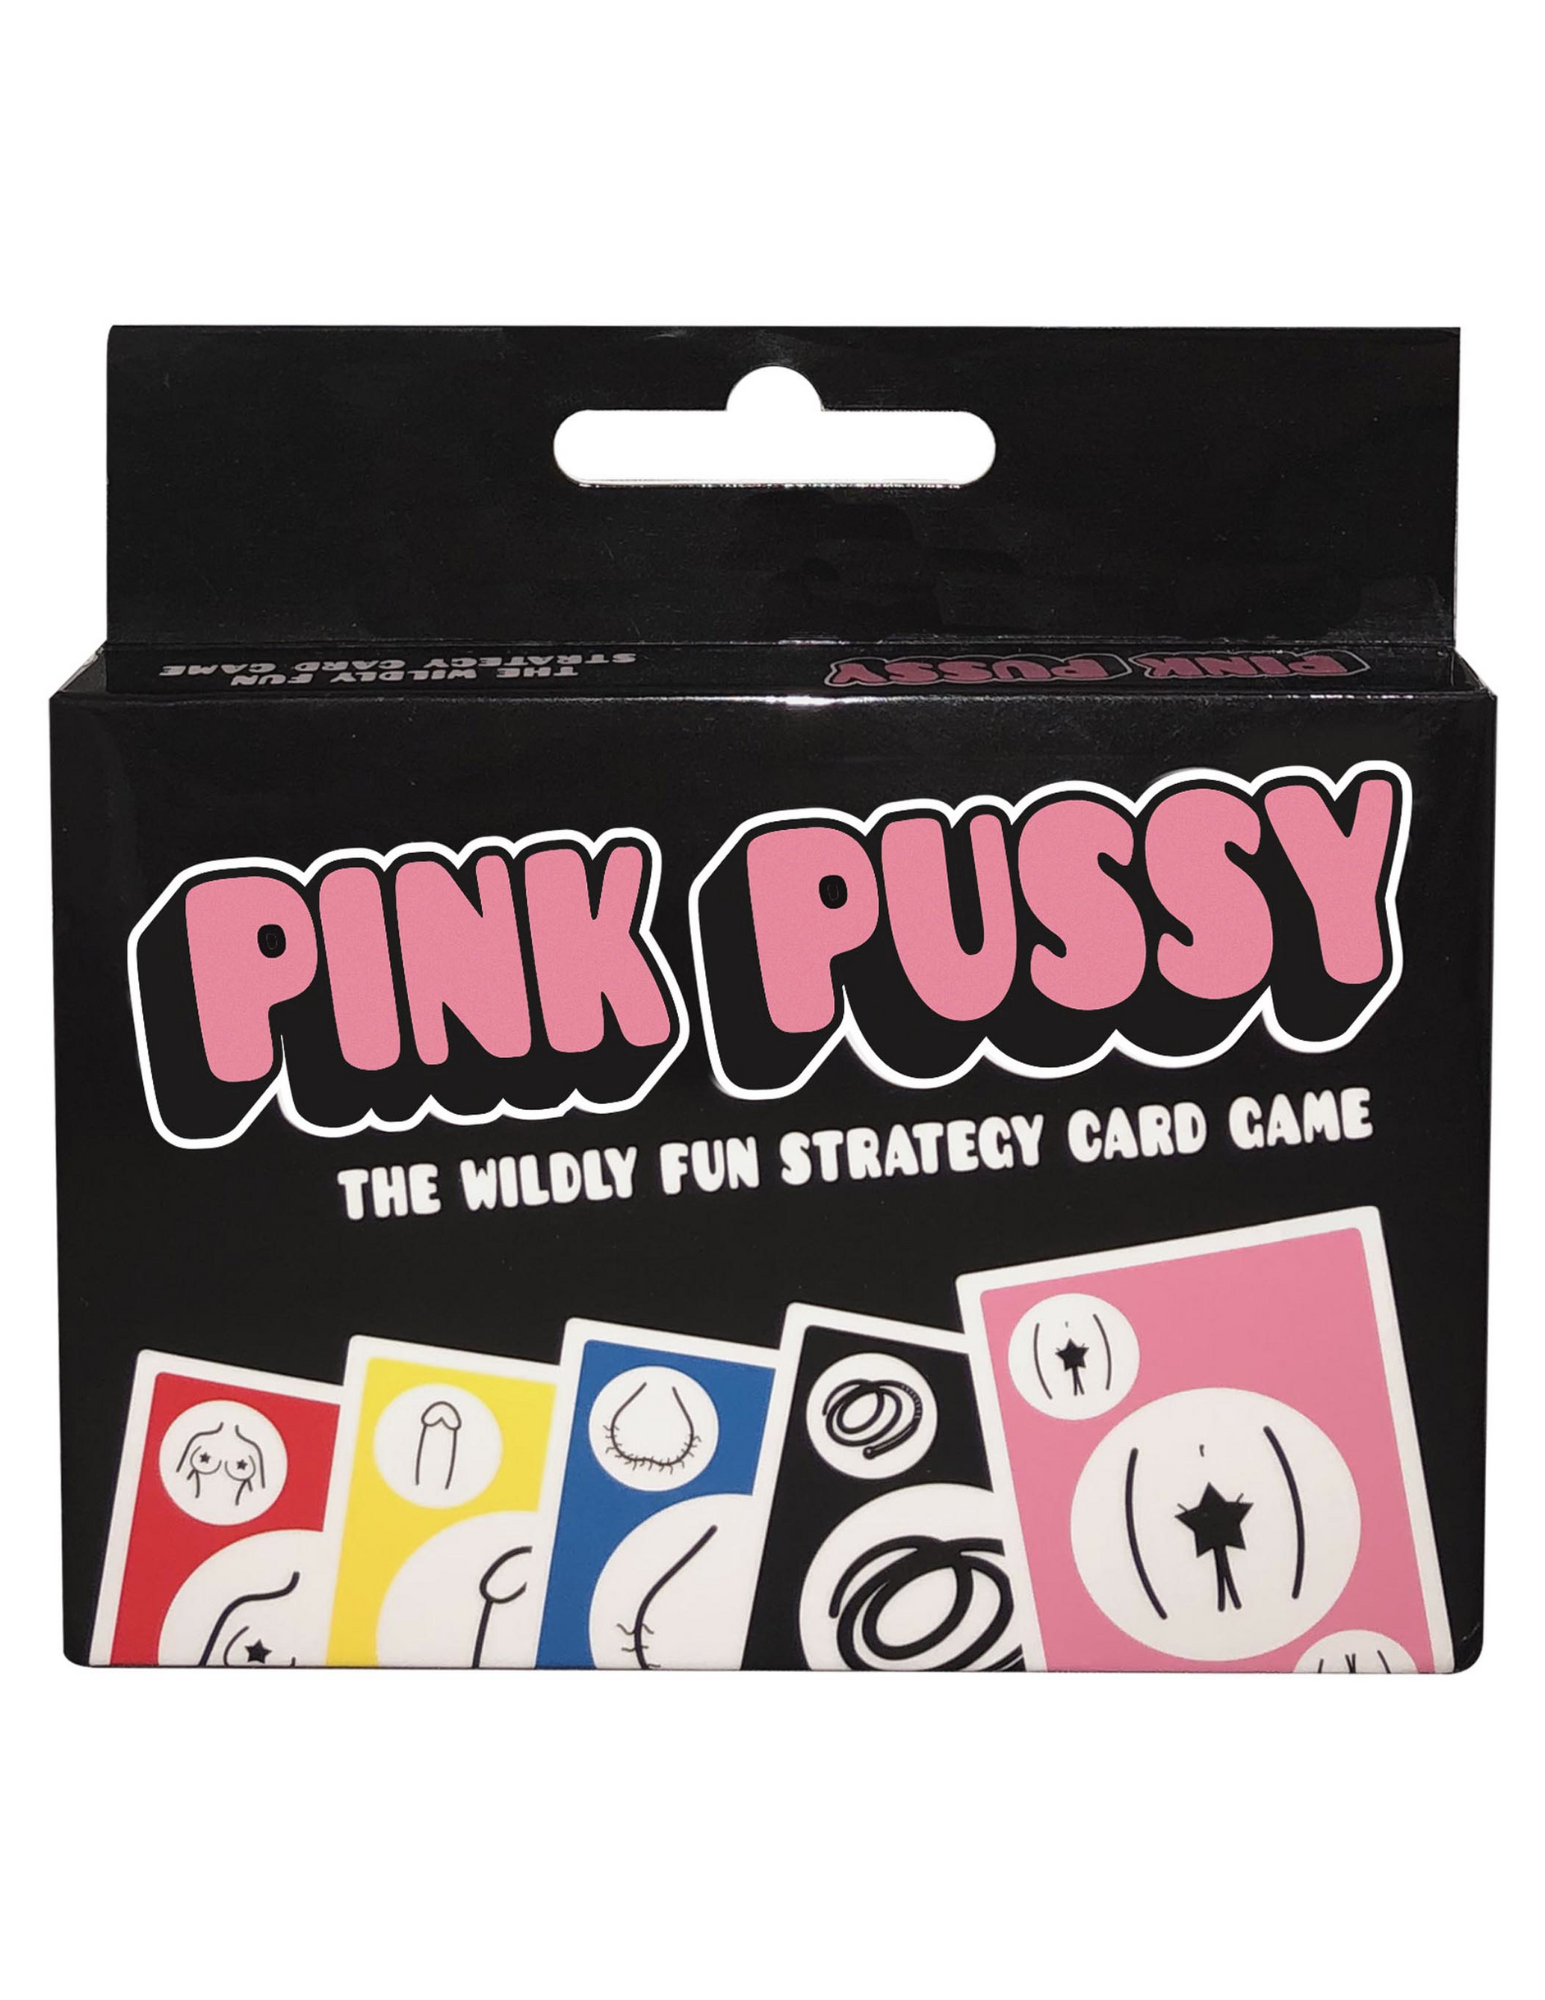 Photo of the front of the box for the Pink Pussy card game from Kheper Games.